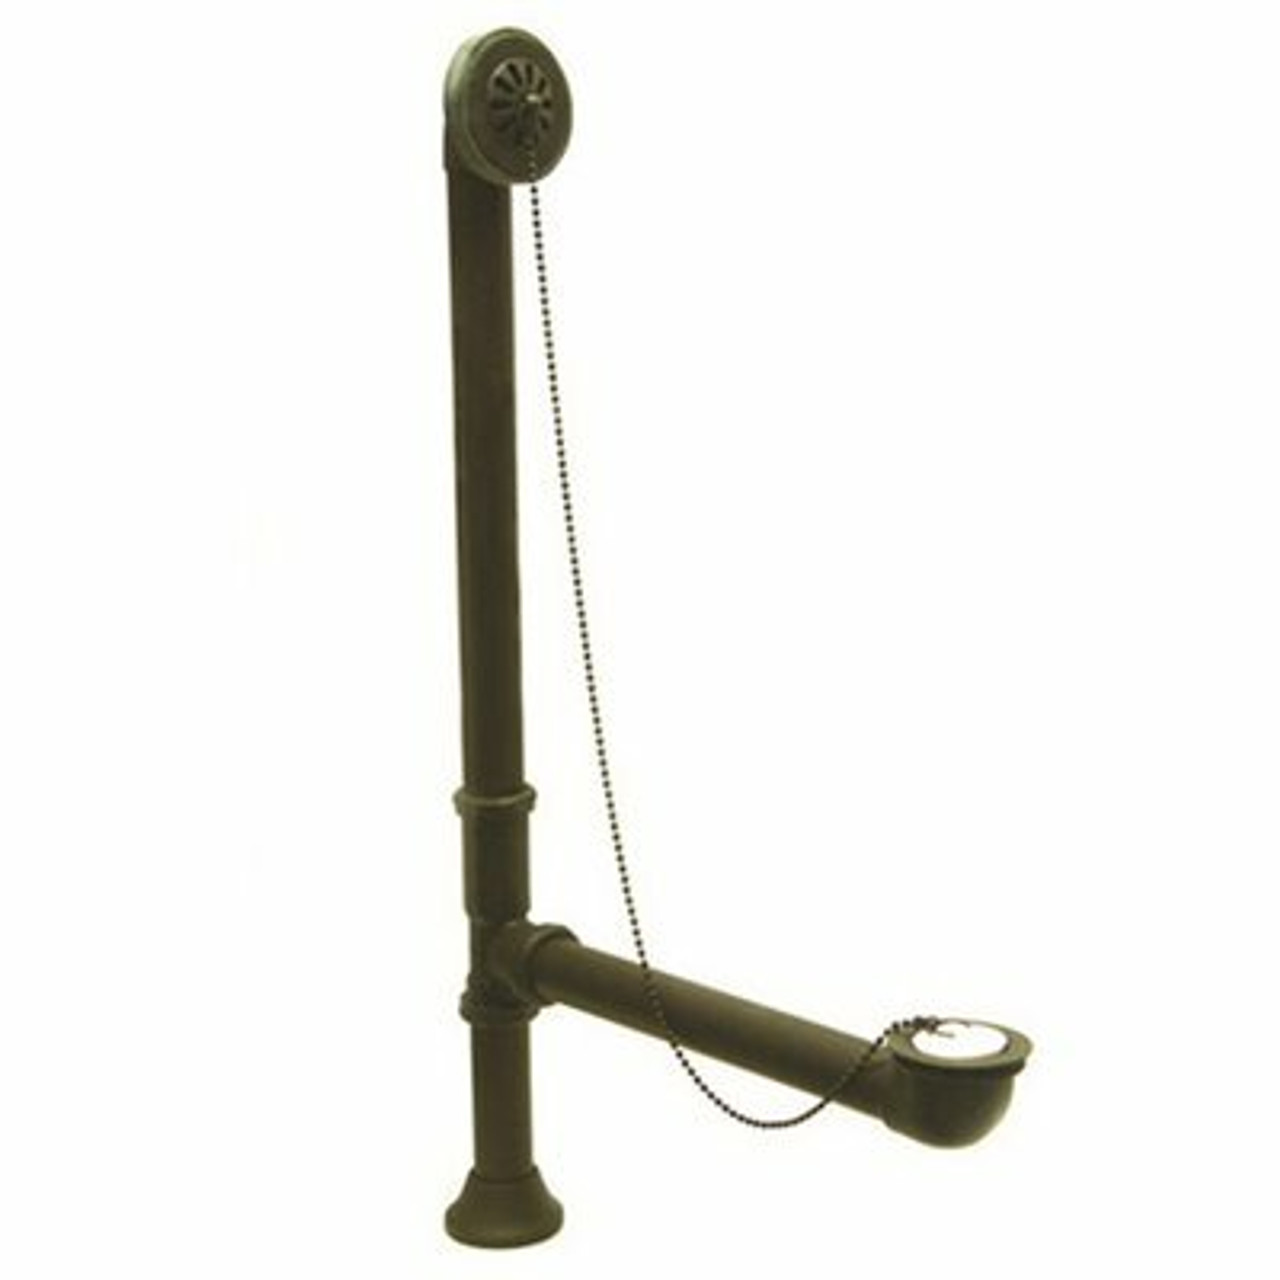 Kingston Brass Claw Foot 1-1/2 In. O.D. Brass Leg Tub Drain With Chain And Stopper In Oil Rubbed Bronze